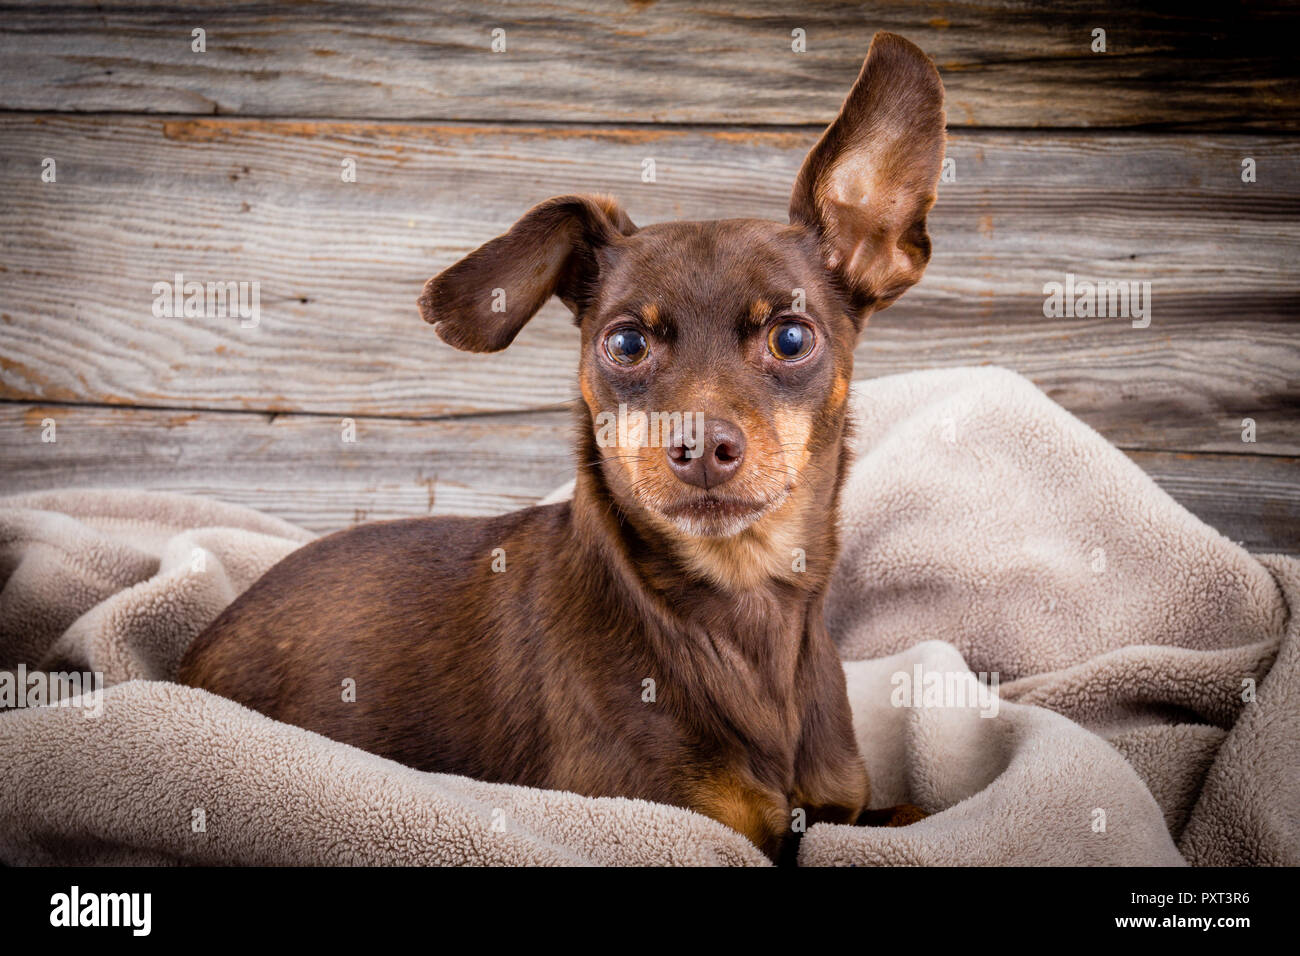 Pinscher dog laying on a blanket portrait Stock Photo